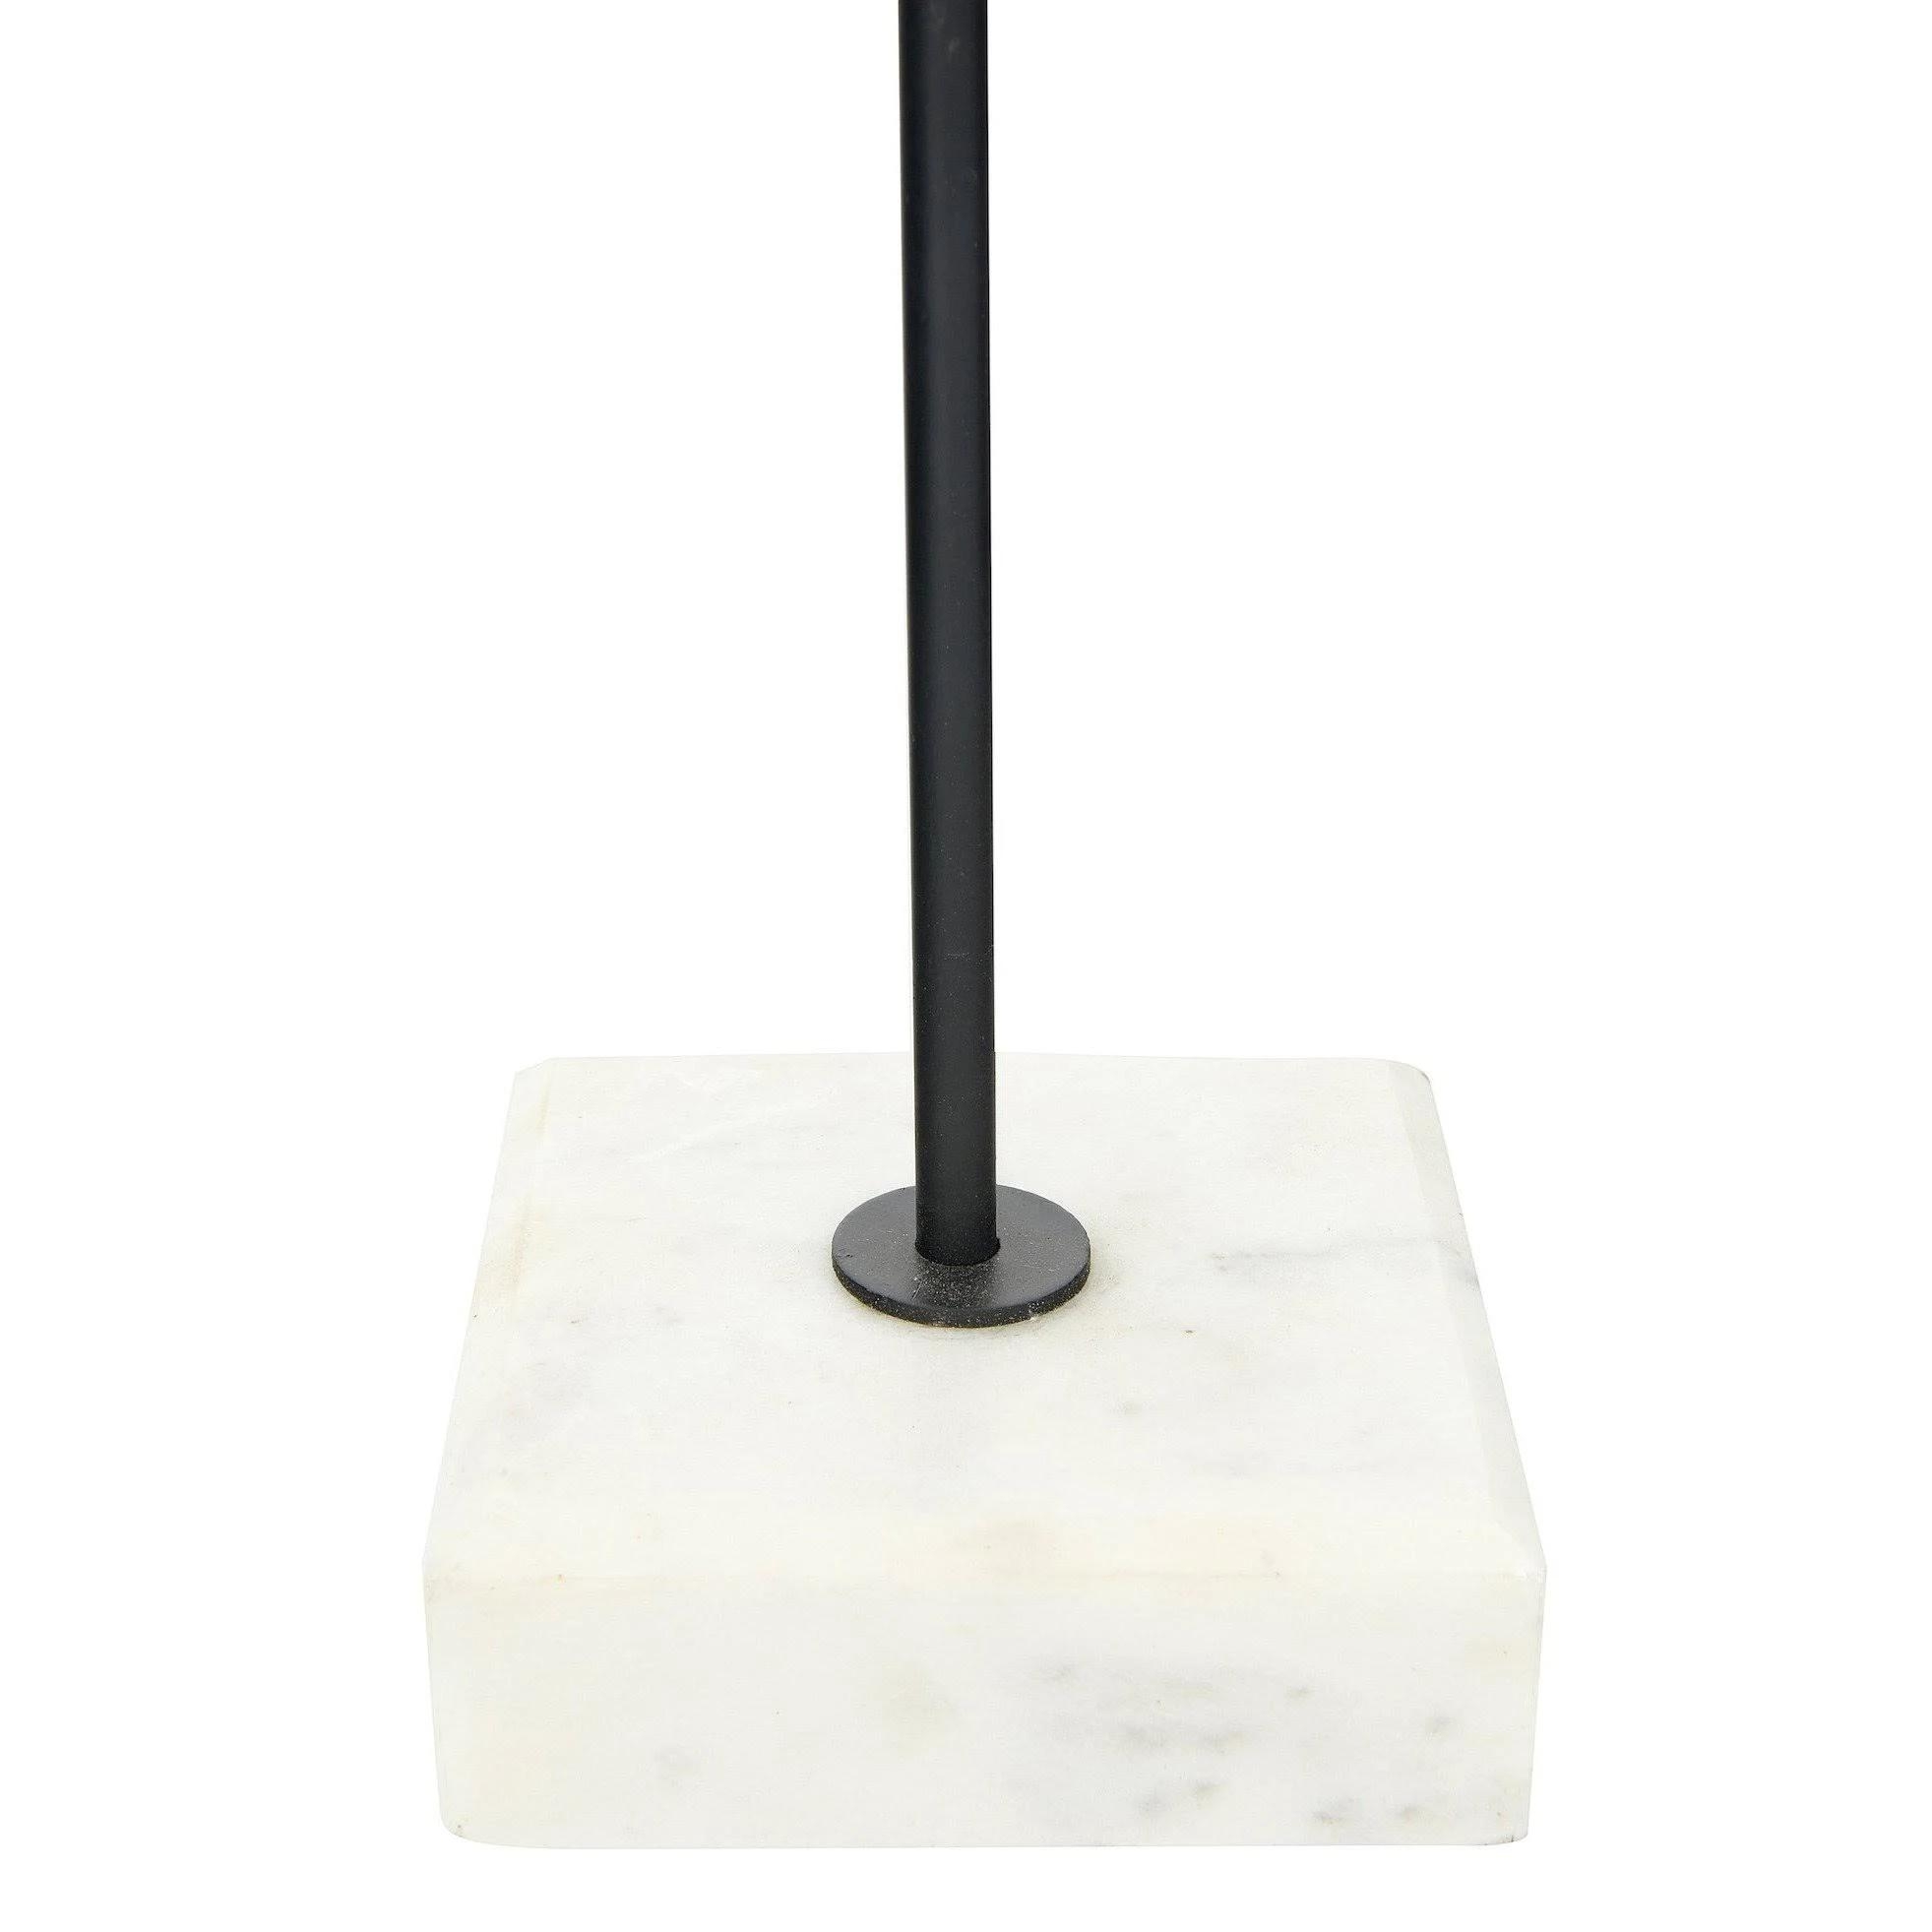 Abstract Art on Marble Base - Image 7